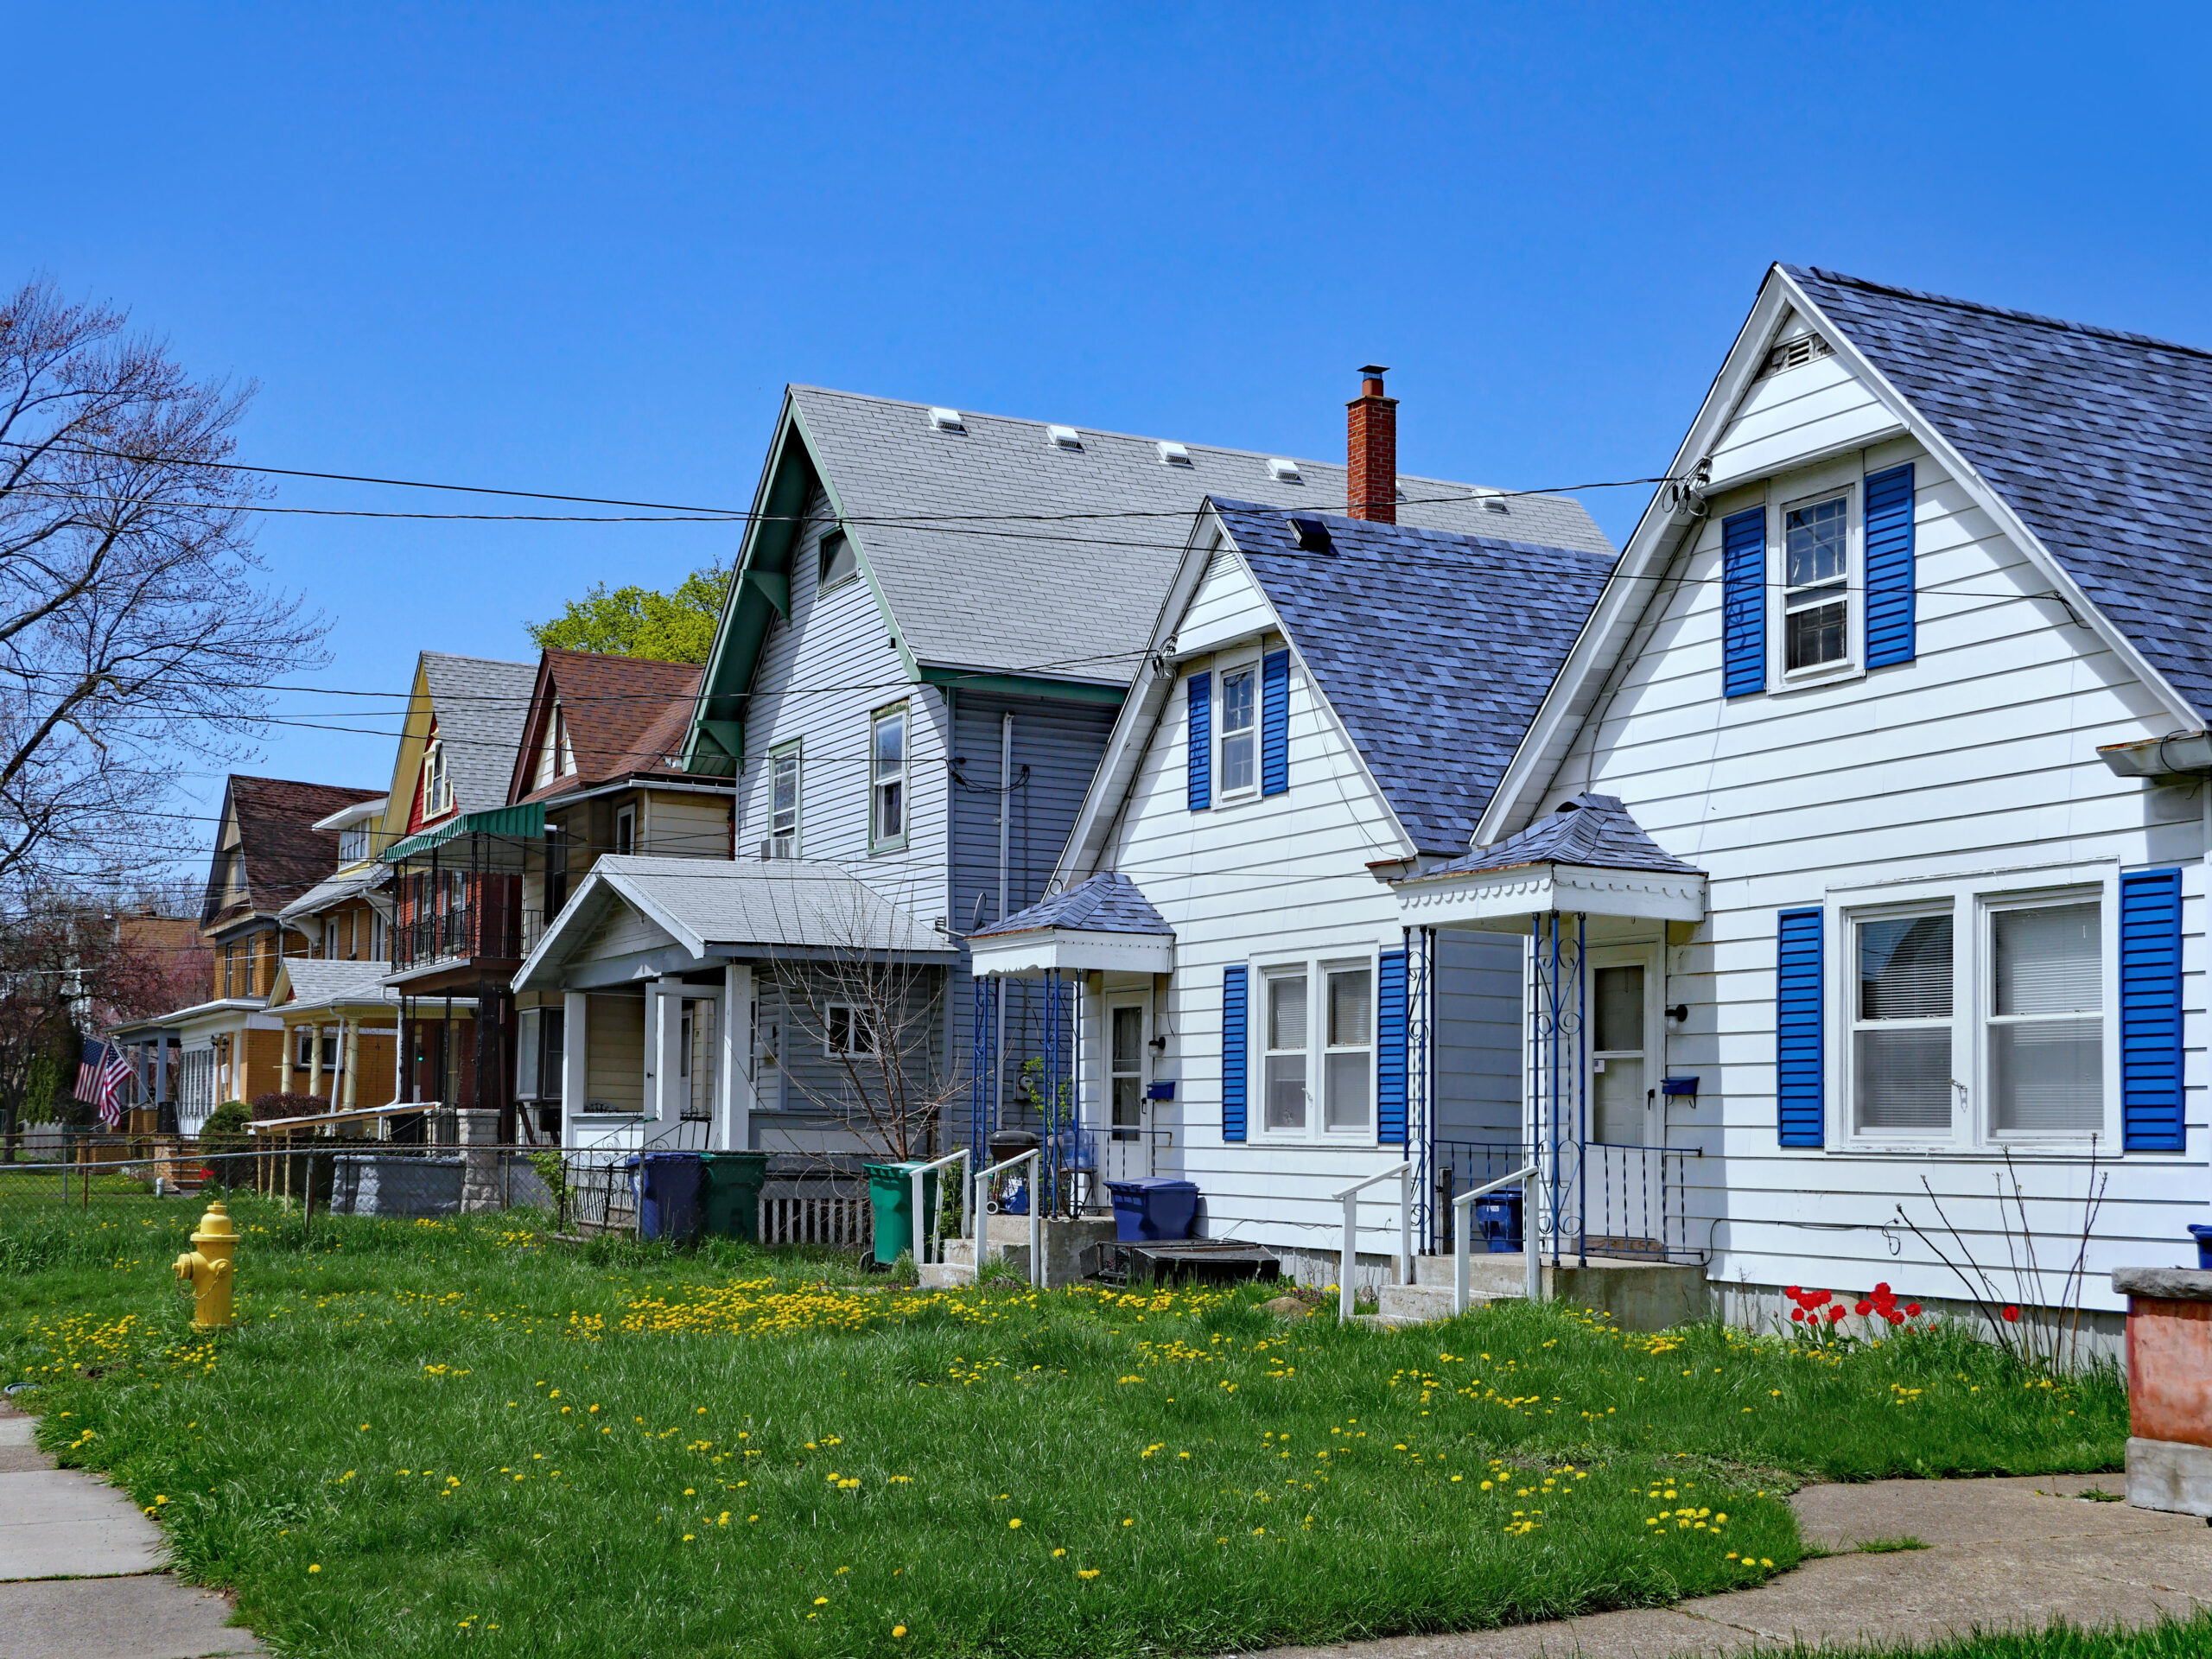 A row of houses with small lawns dotted with dandelions